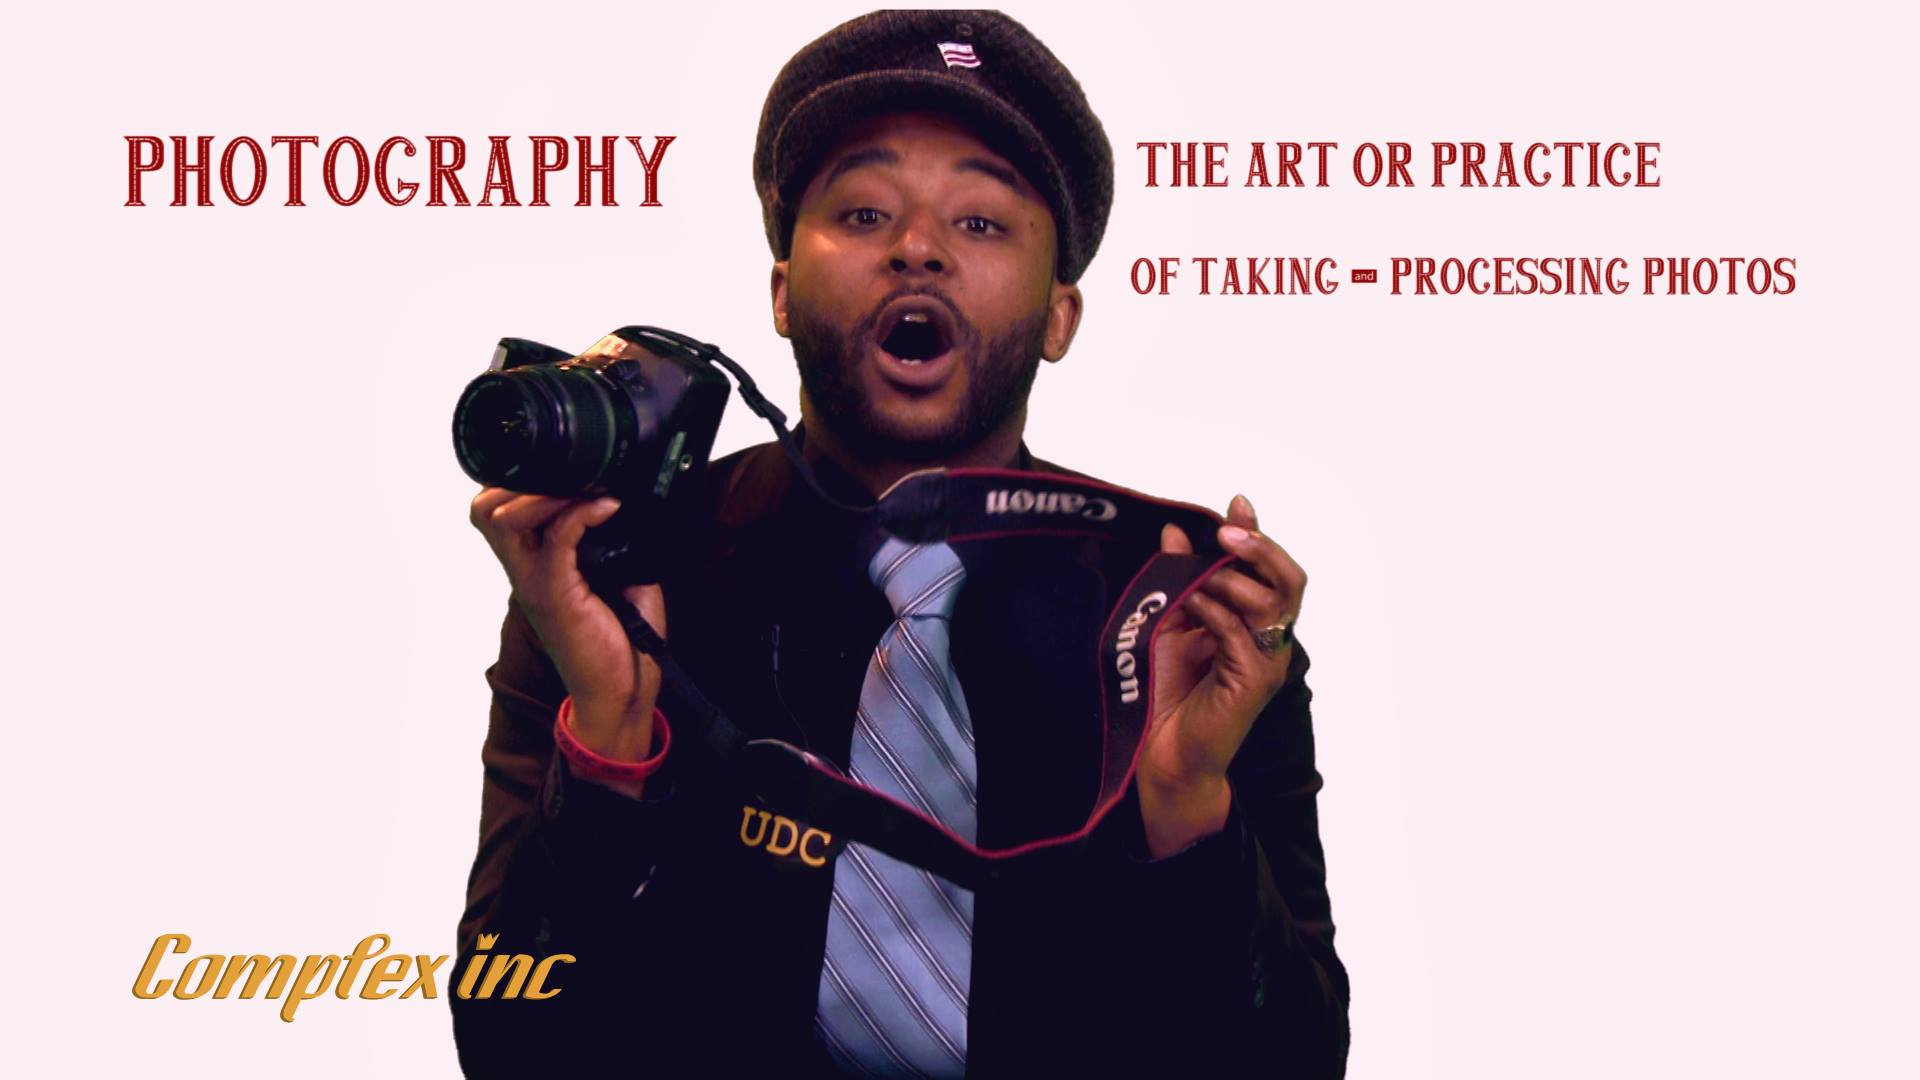 📸 WASHINGTON D.C: NEW EPISODE OF THE FRANKEY BARRZ SHOW- EPISODE 04 "PHOTOGRAPHY & POLICY" 📸